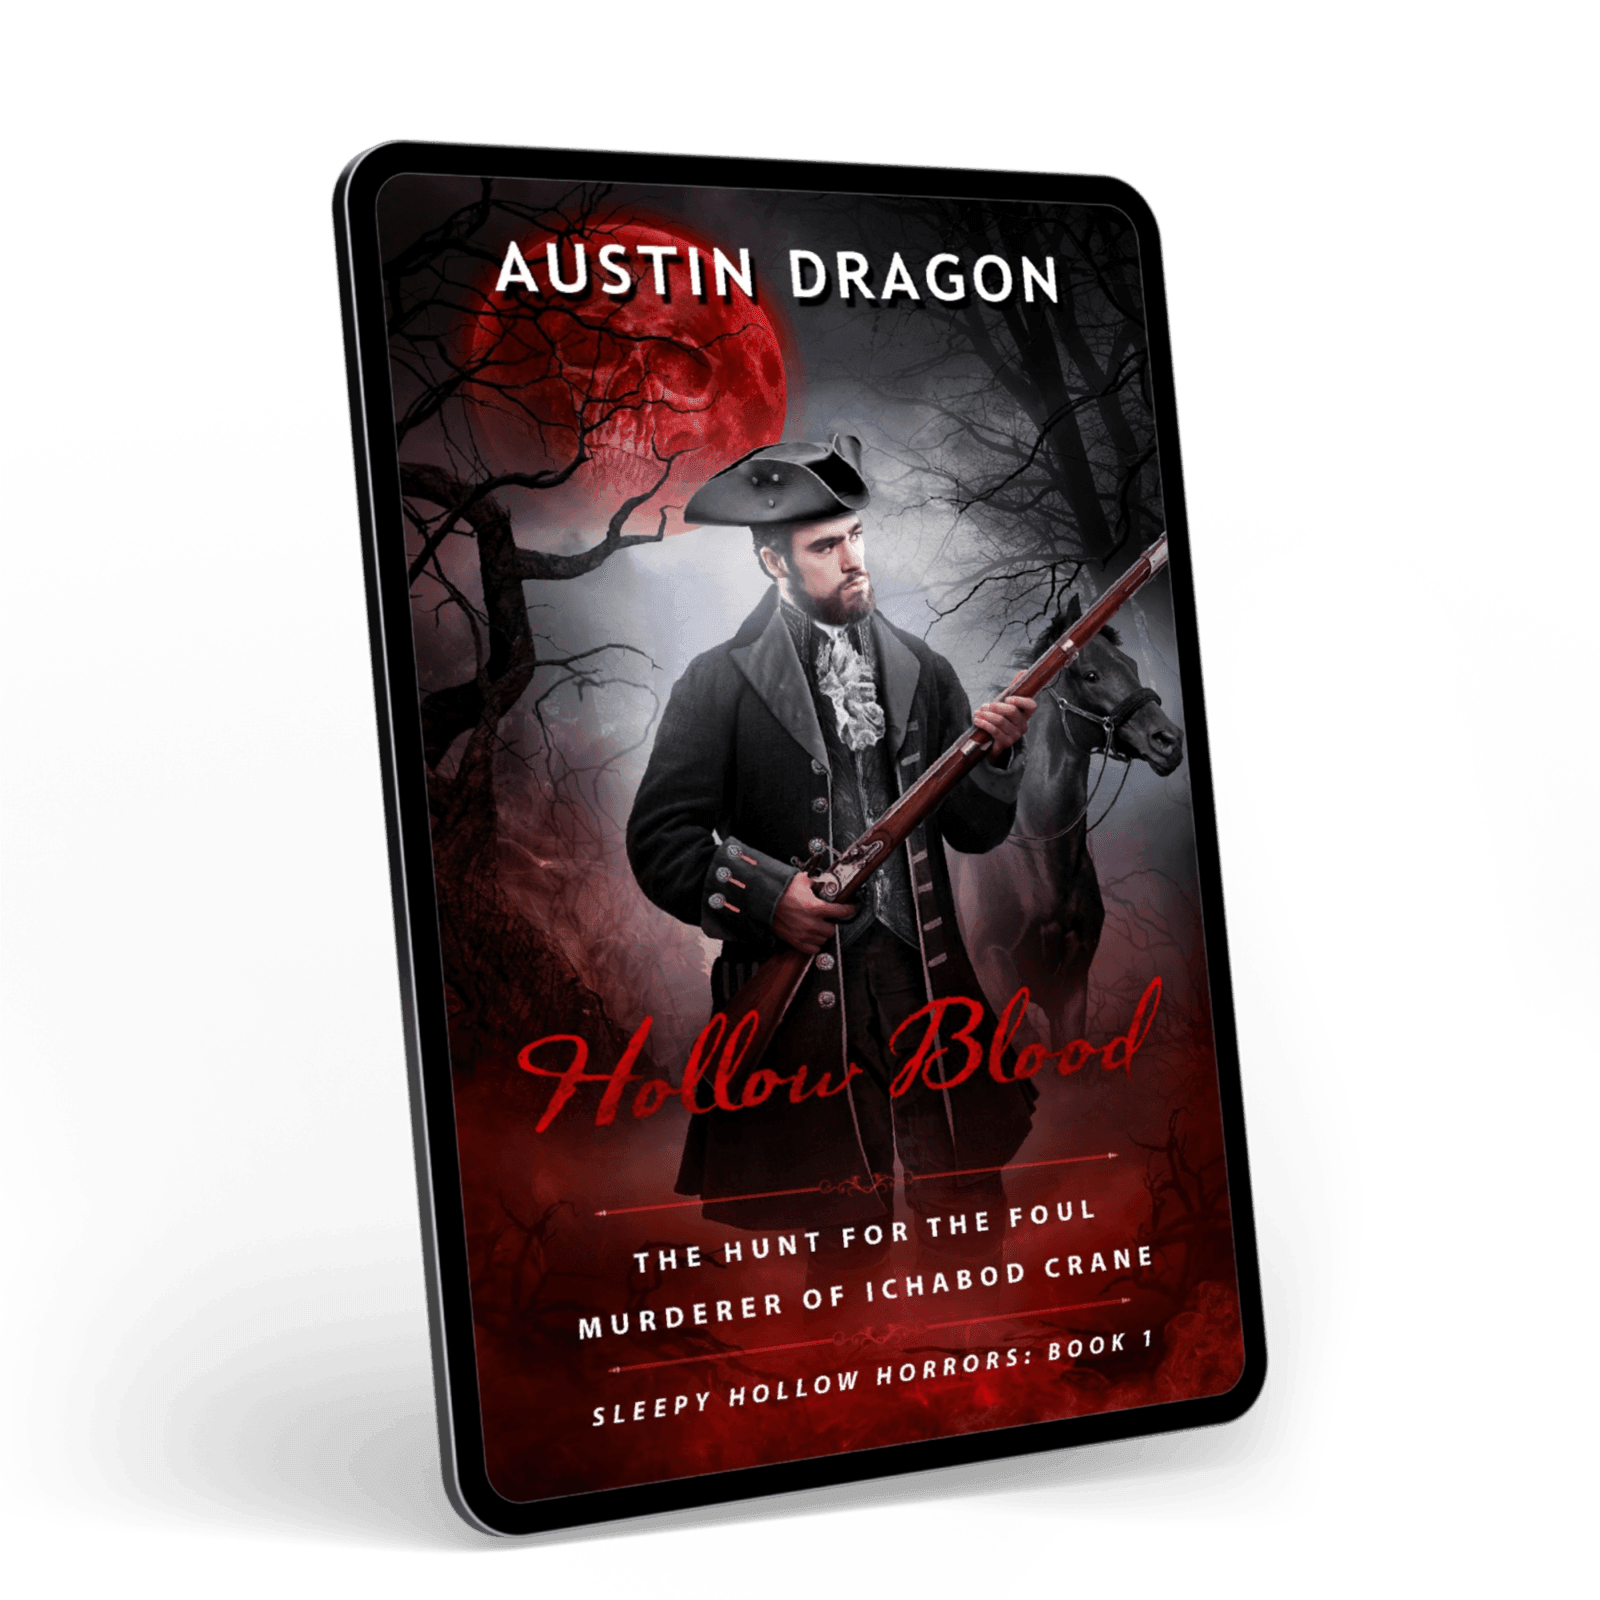 Hollow Blood: The Hunt For the Foul Murderer of Ichabod Crane (Sleepy Hollow Horrors, Book 1) Ebook